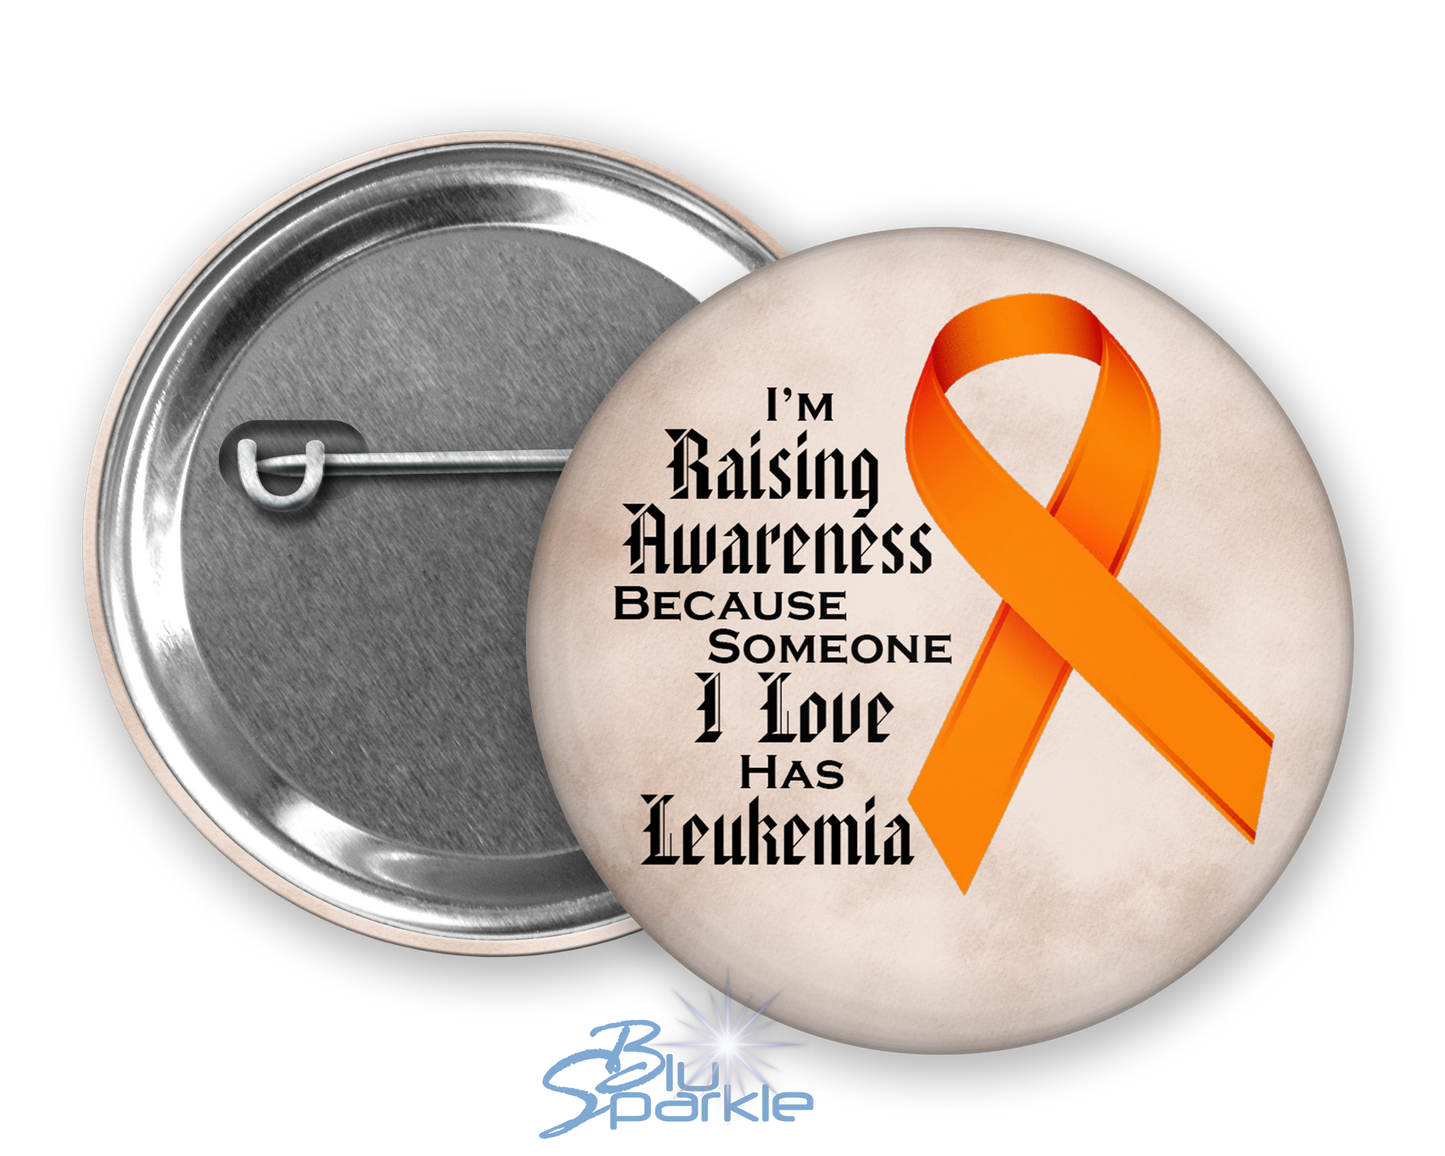 I'm Raising Awareness Because Someone I Love Died From (Has, Survived) Leukemia Pinback Button